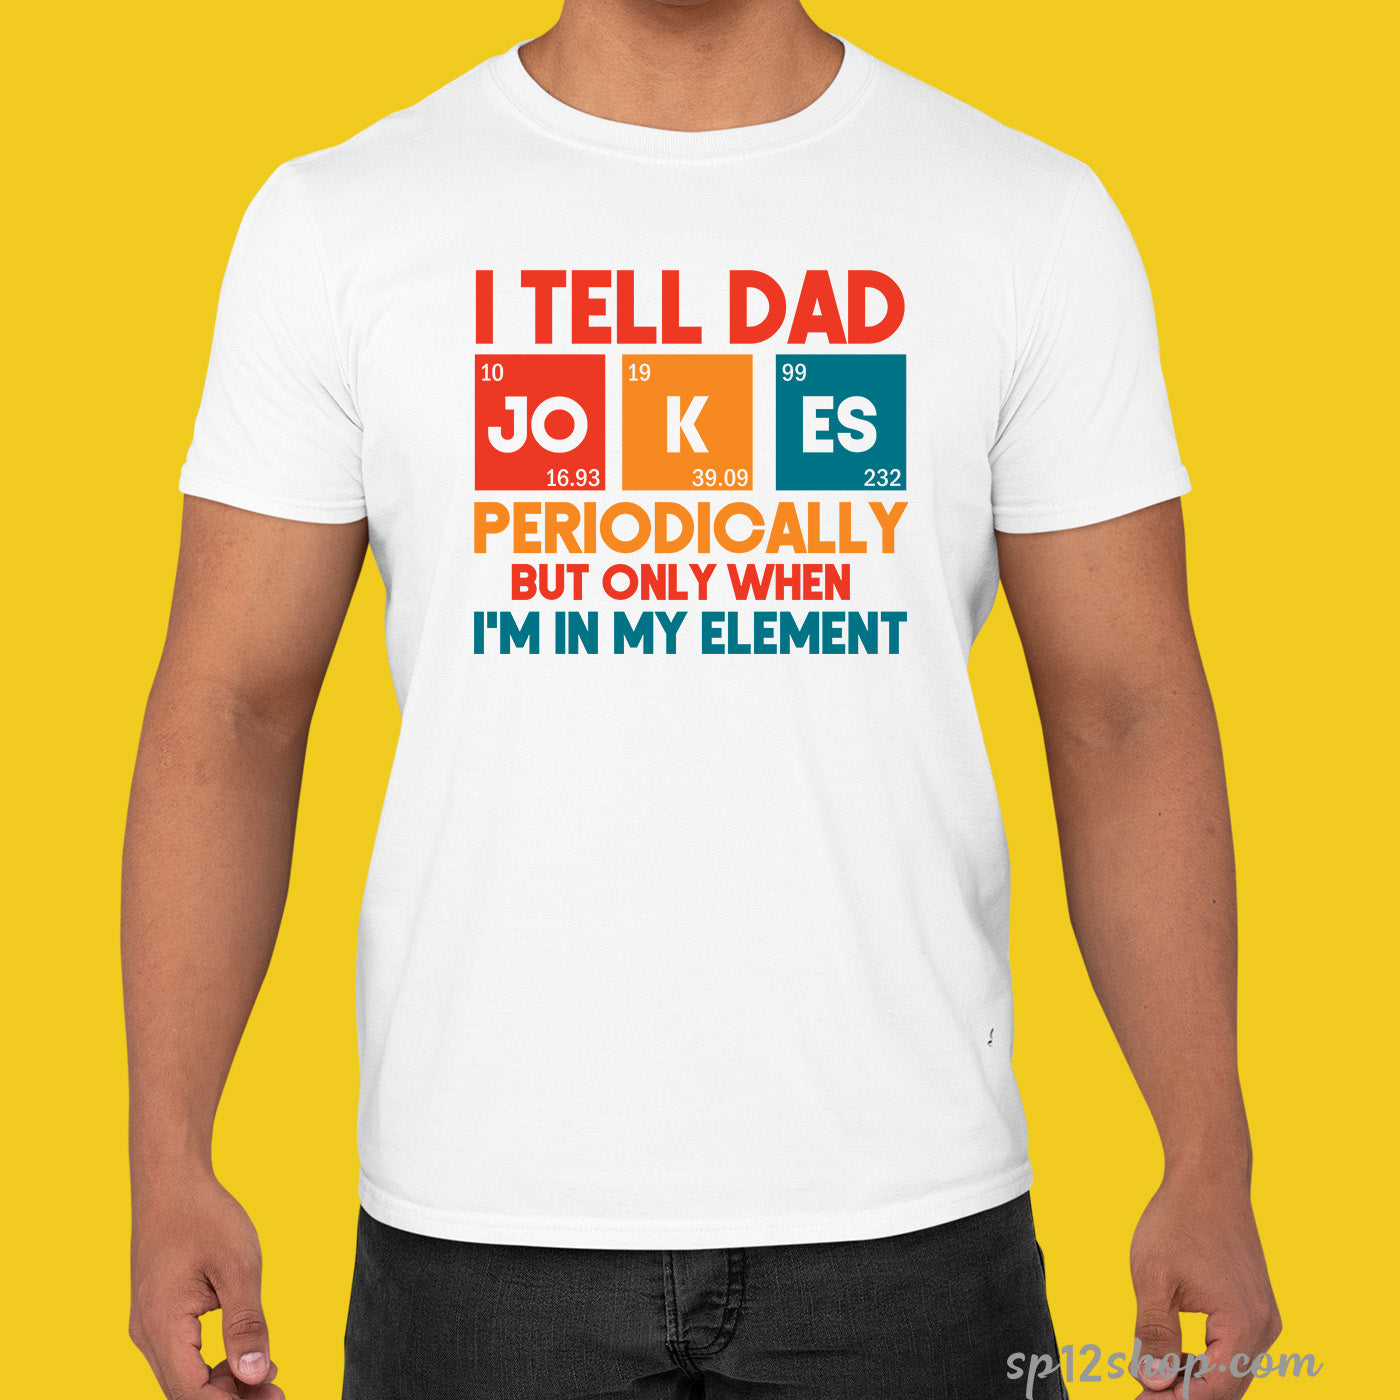 I Tell Dad Jokes Periodically But Only When I'm In My Element T Shirt